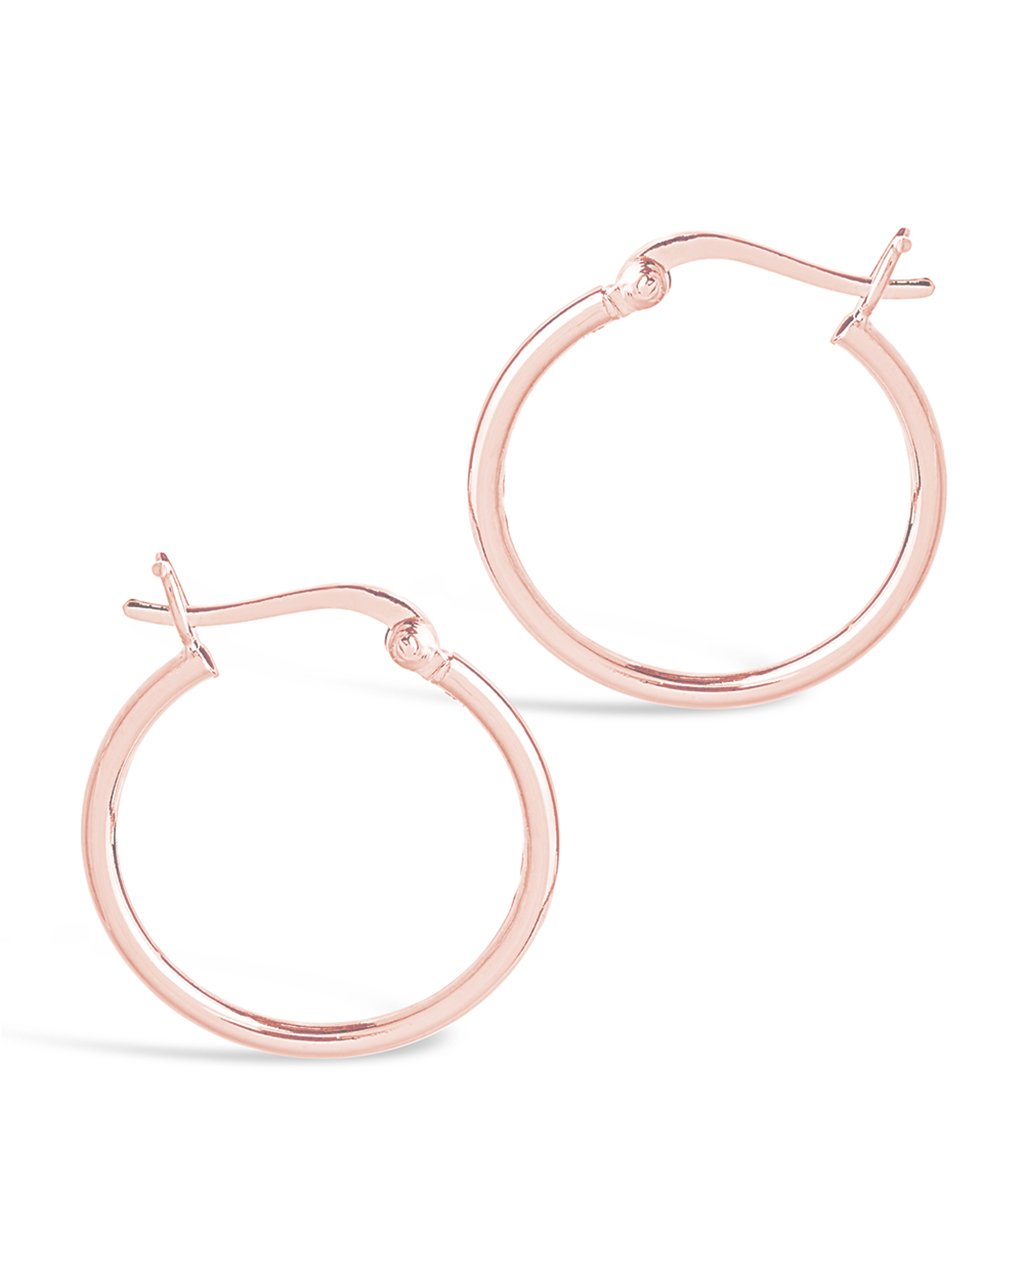 Sterling Forever Thick Hollow Hoops Earrings Earring Silver : One Size